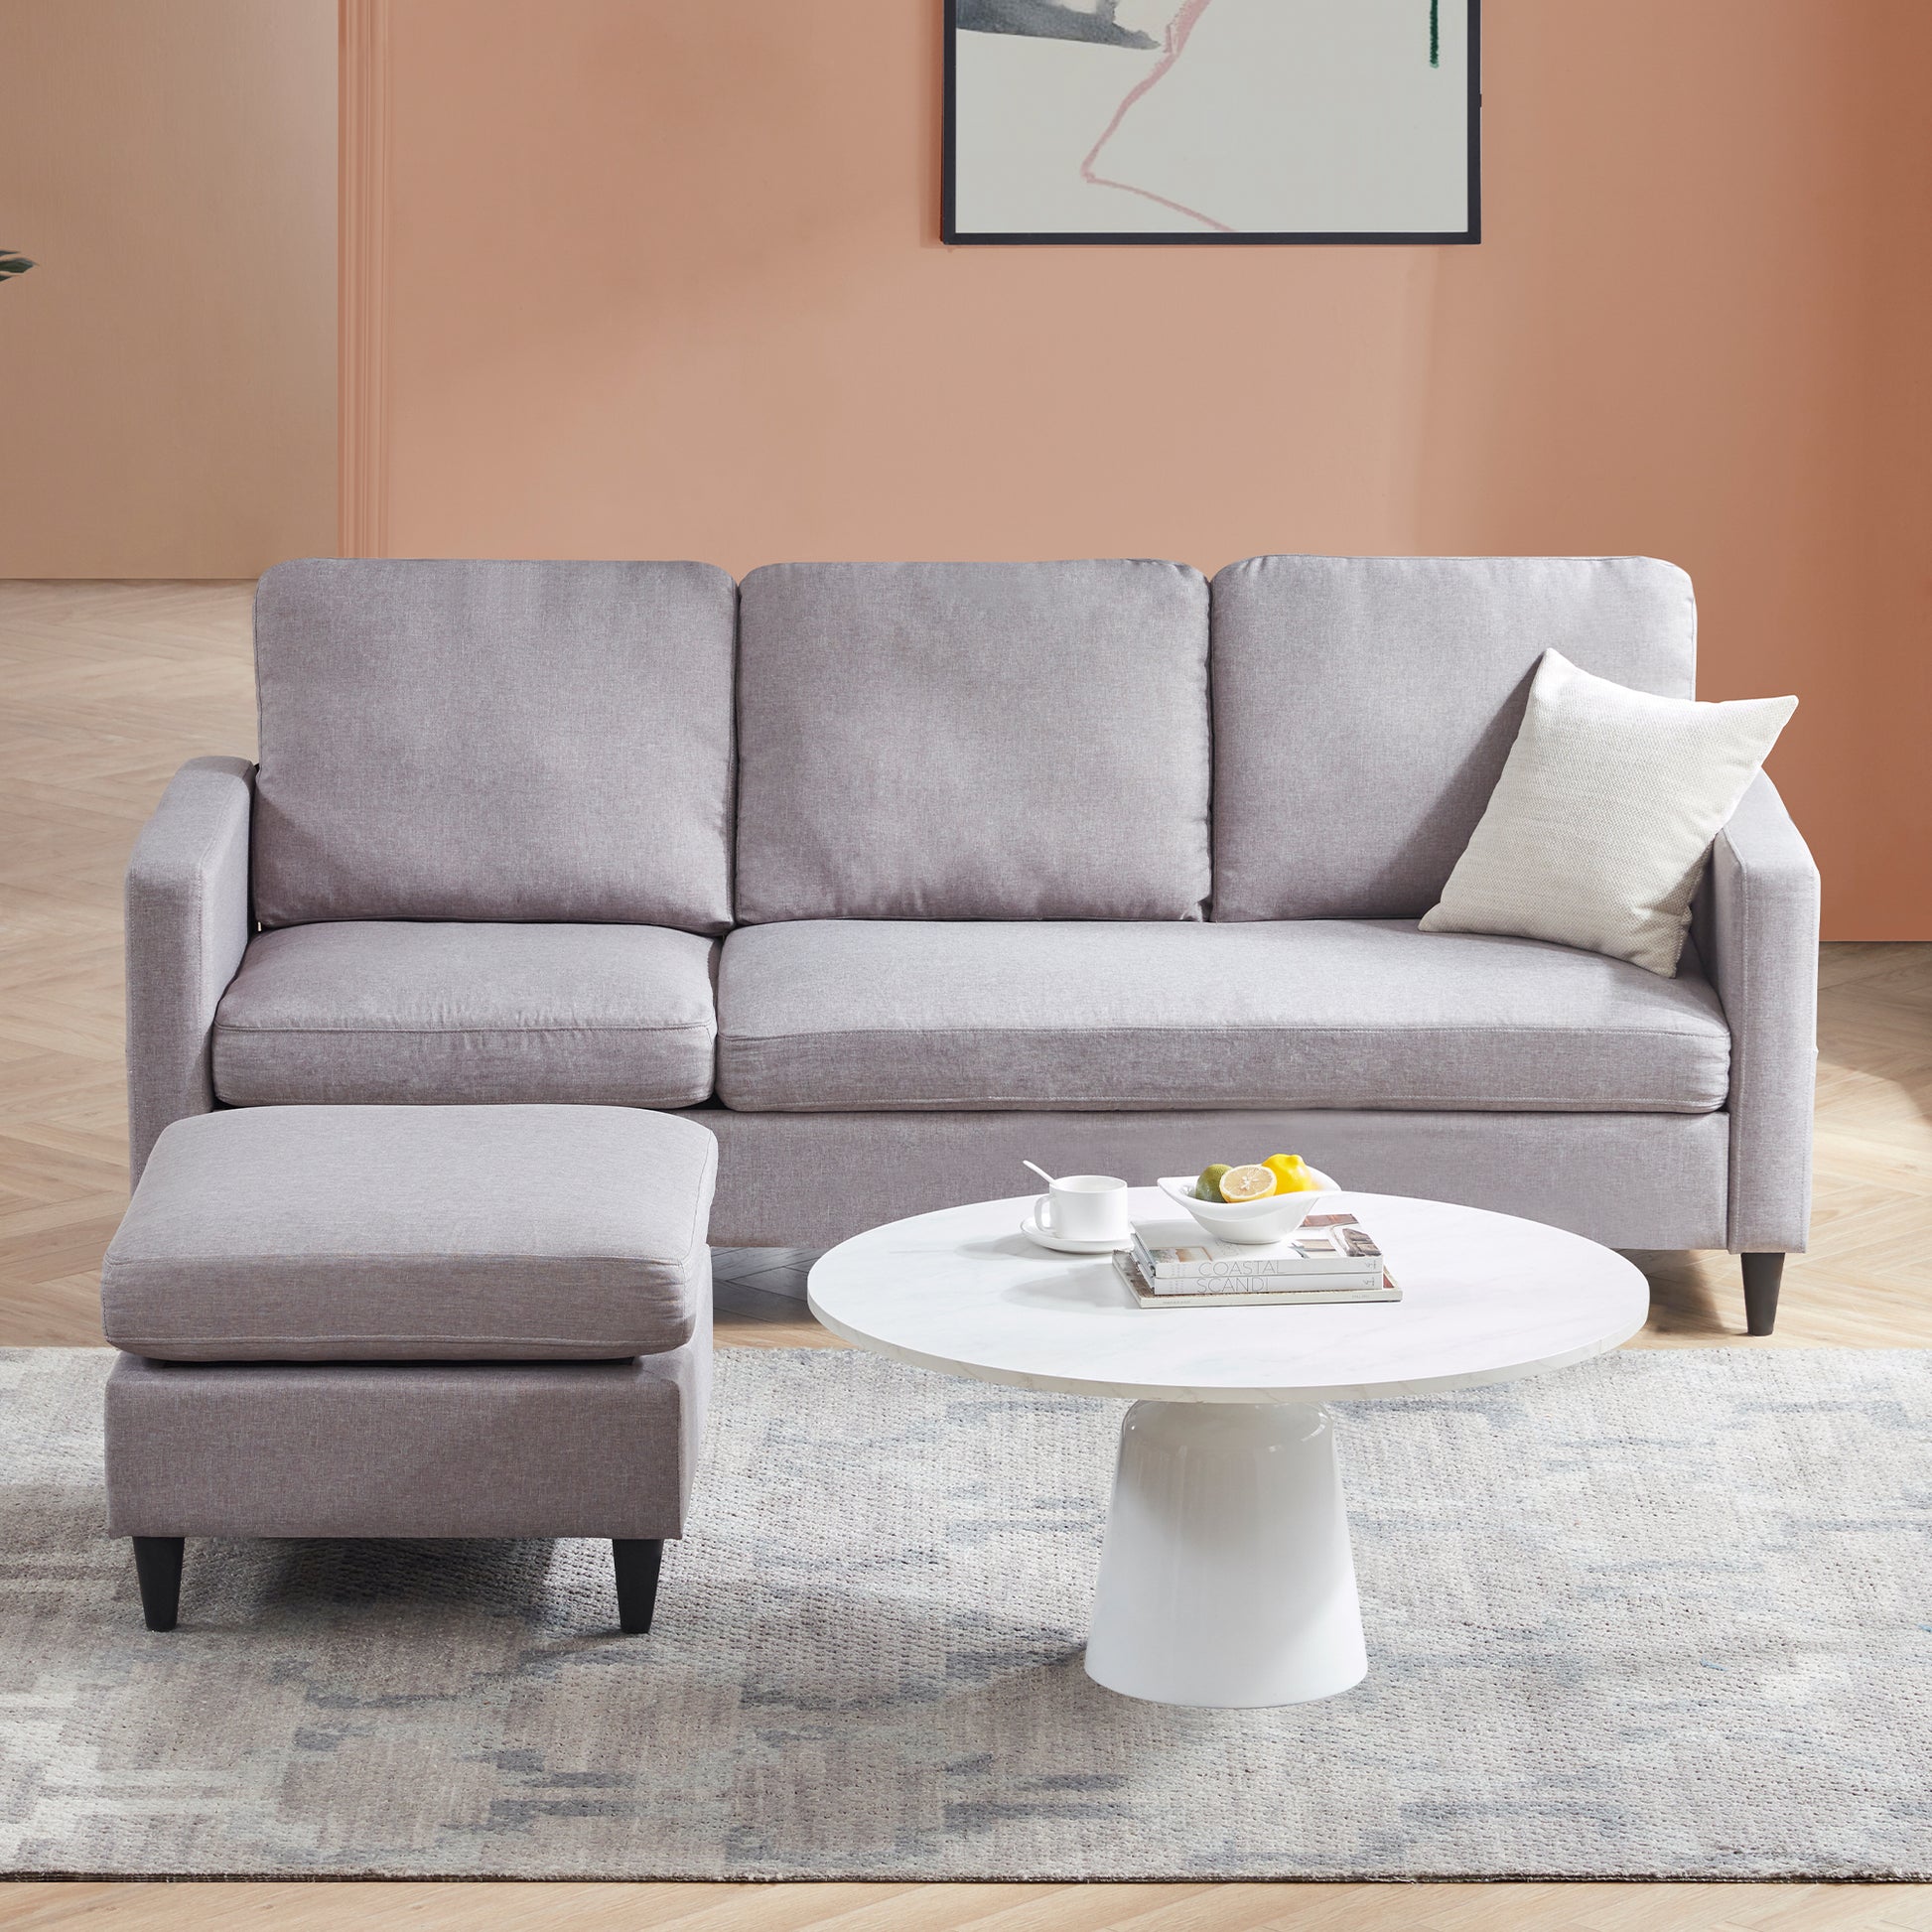 Reversible L-Shaped Sectional w/Pocket Gray